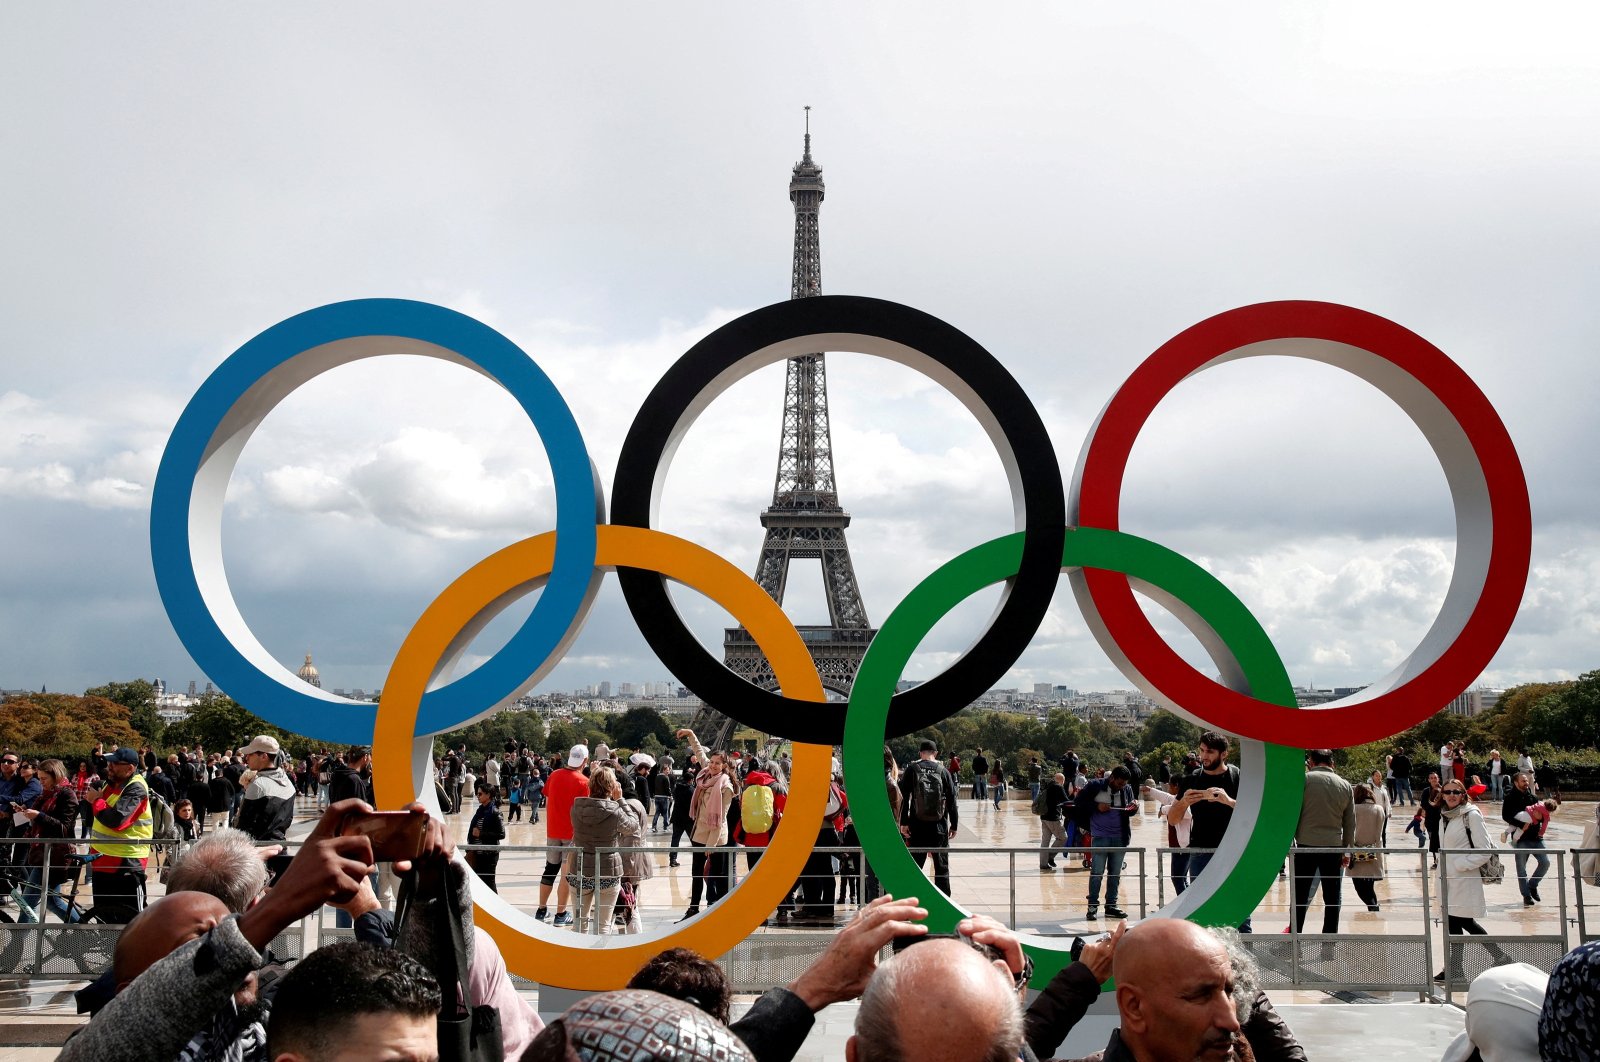 Olympic rings to celebrate the IOC official announcement that Paris won the 2024 Olympic bid are seen in front of the Eiffel Tower, Paris, France, Sept. 16, 2017. (Reuters File Photo)